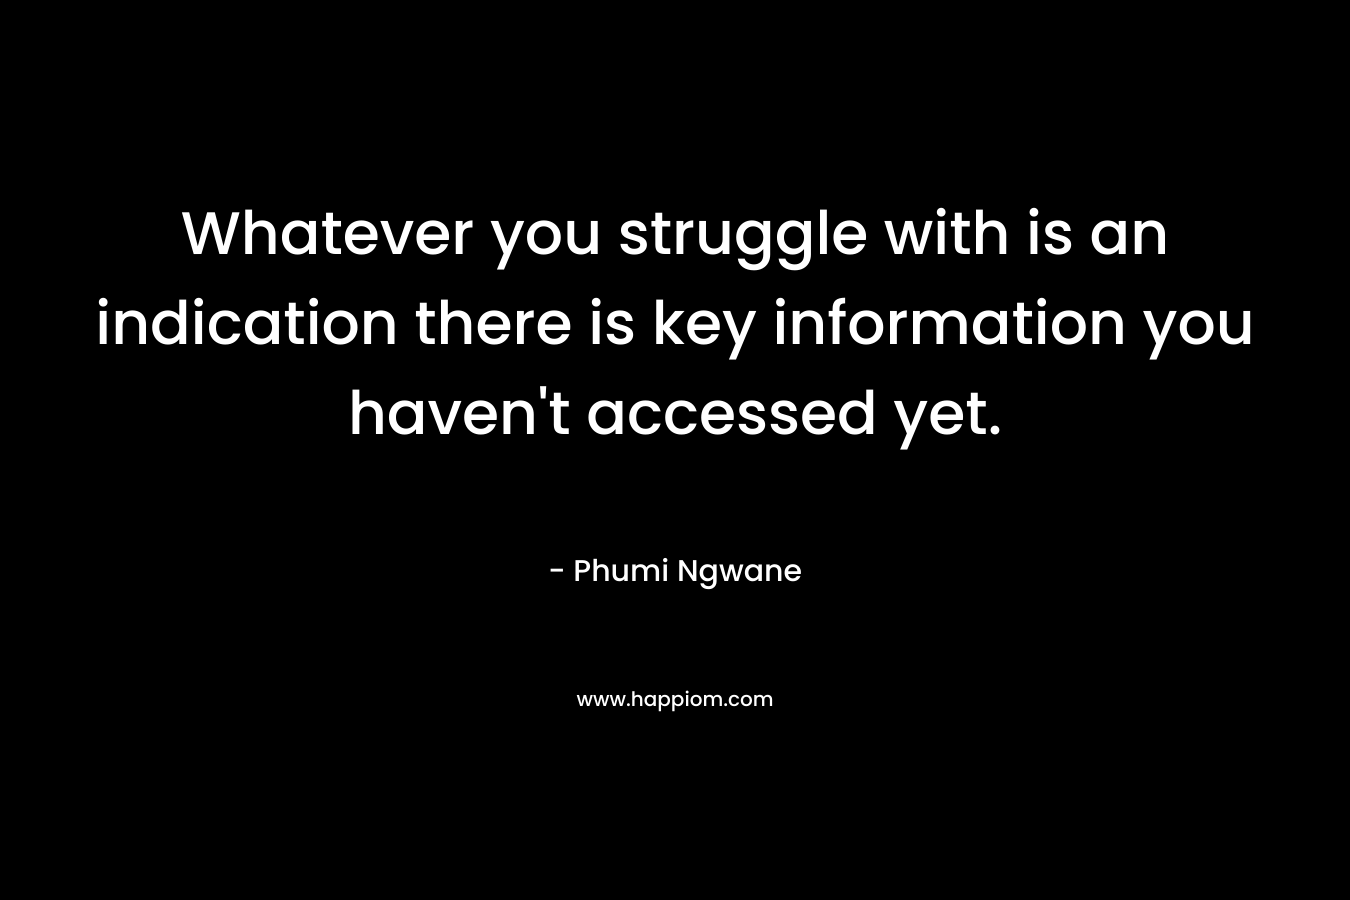 Whatever you struggle with is an indication there is key information you haven’t accessed yet. – Phumi Ngwane